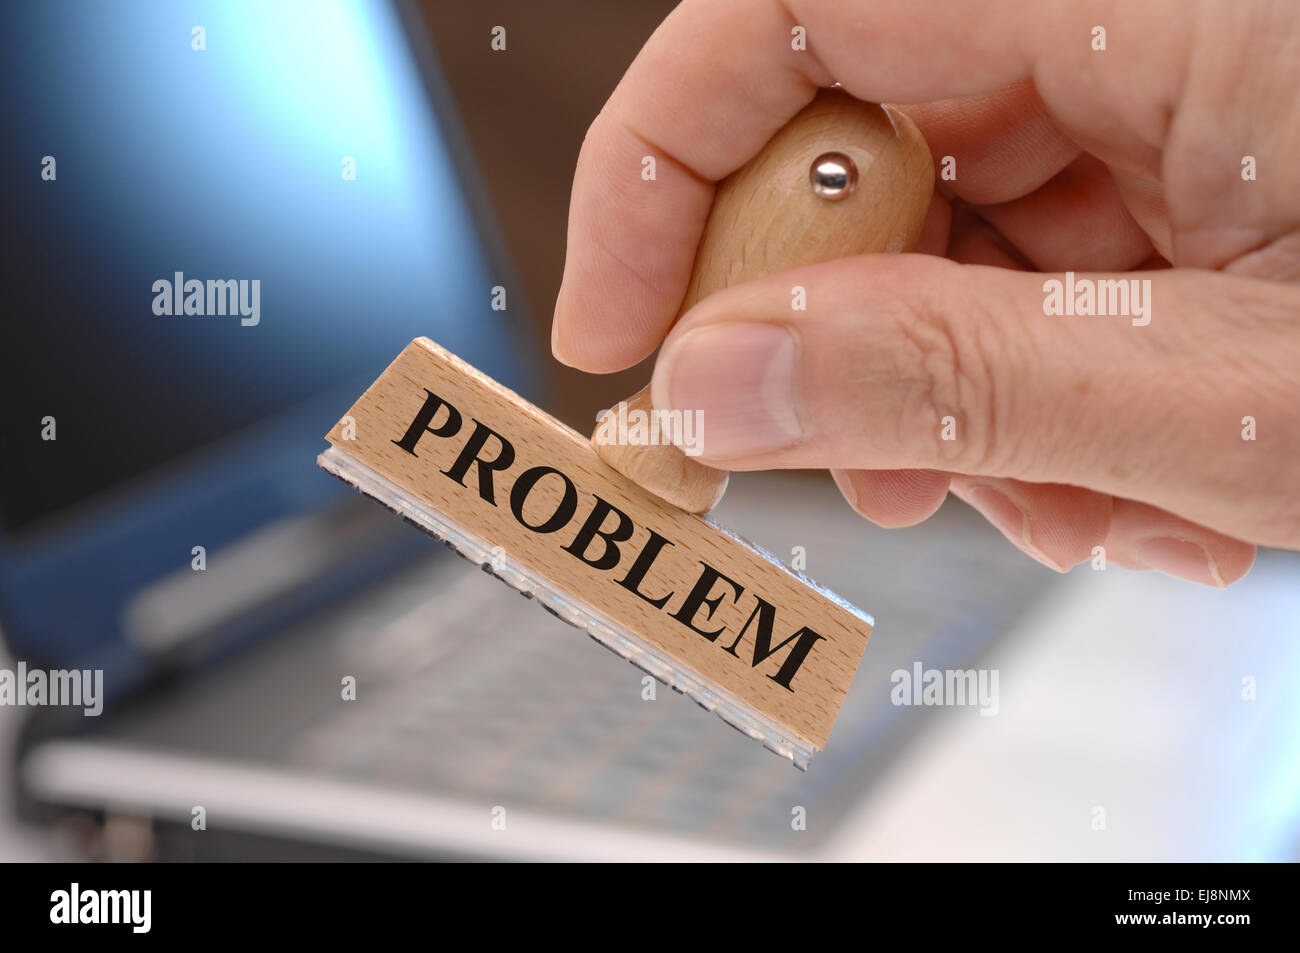 problem and solution Stock Photo